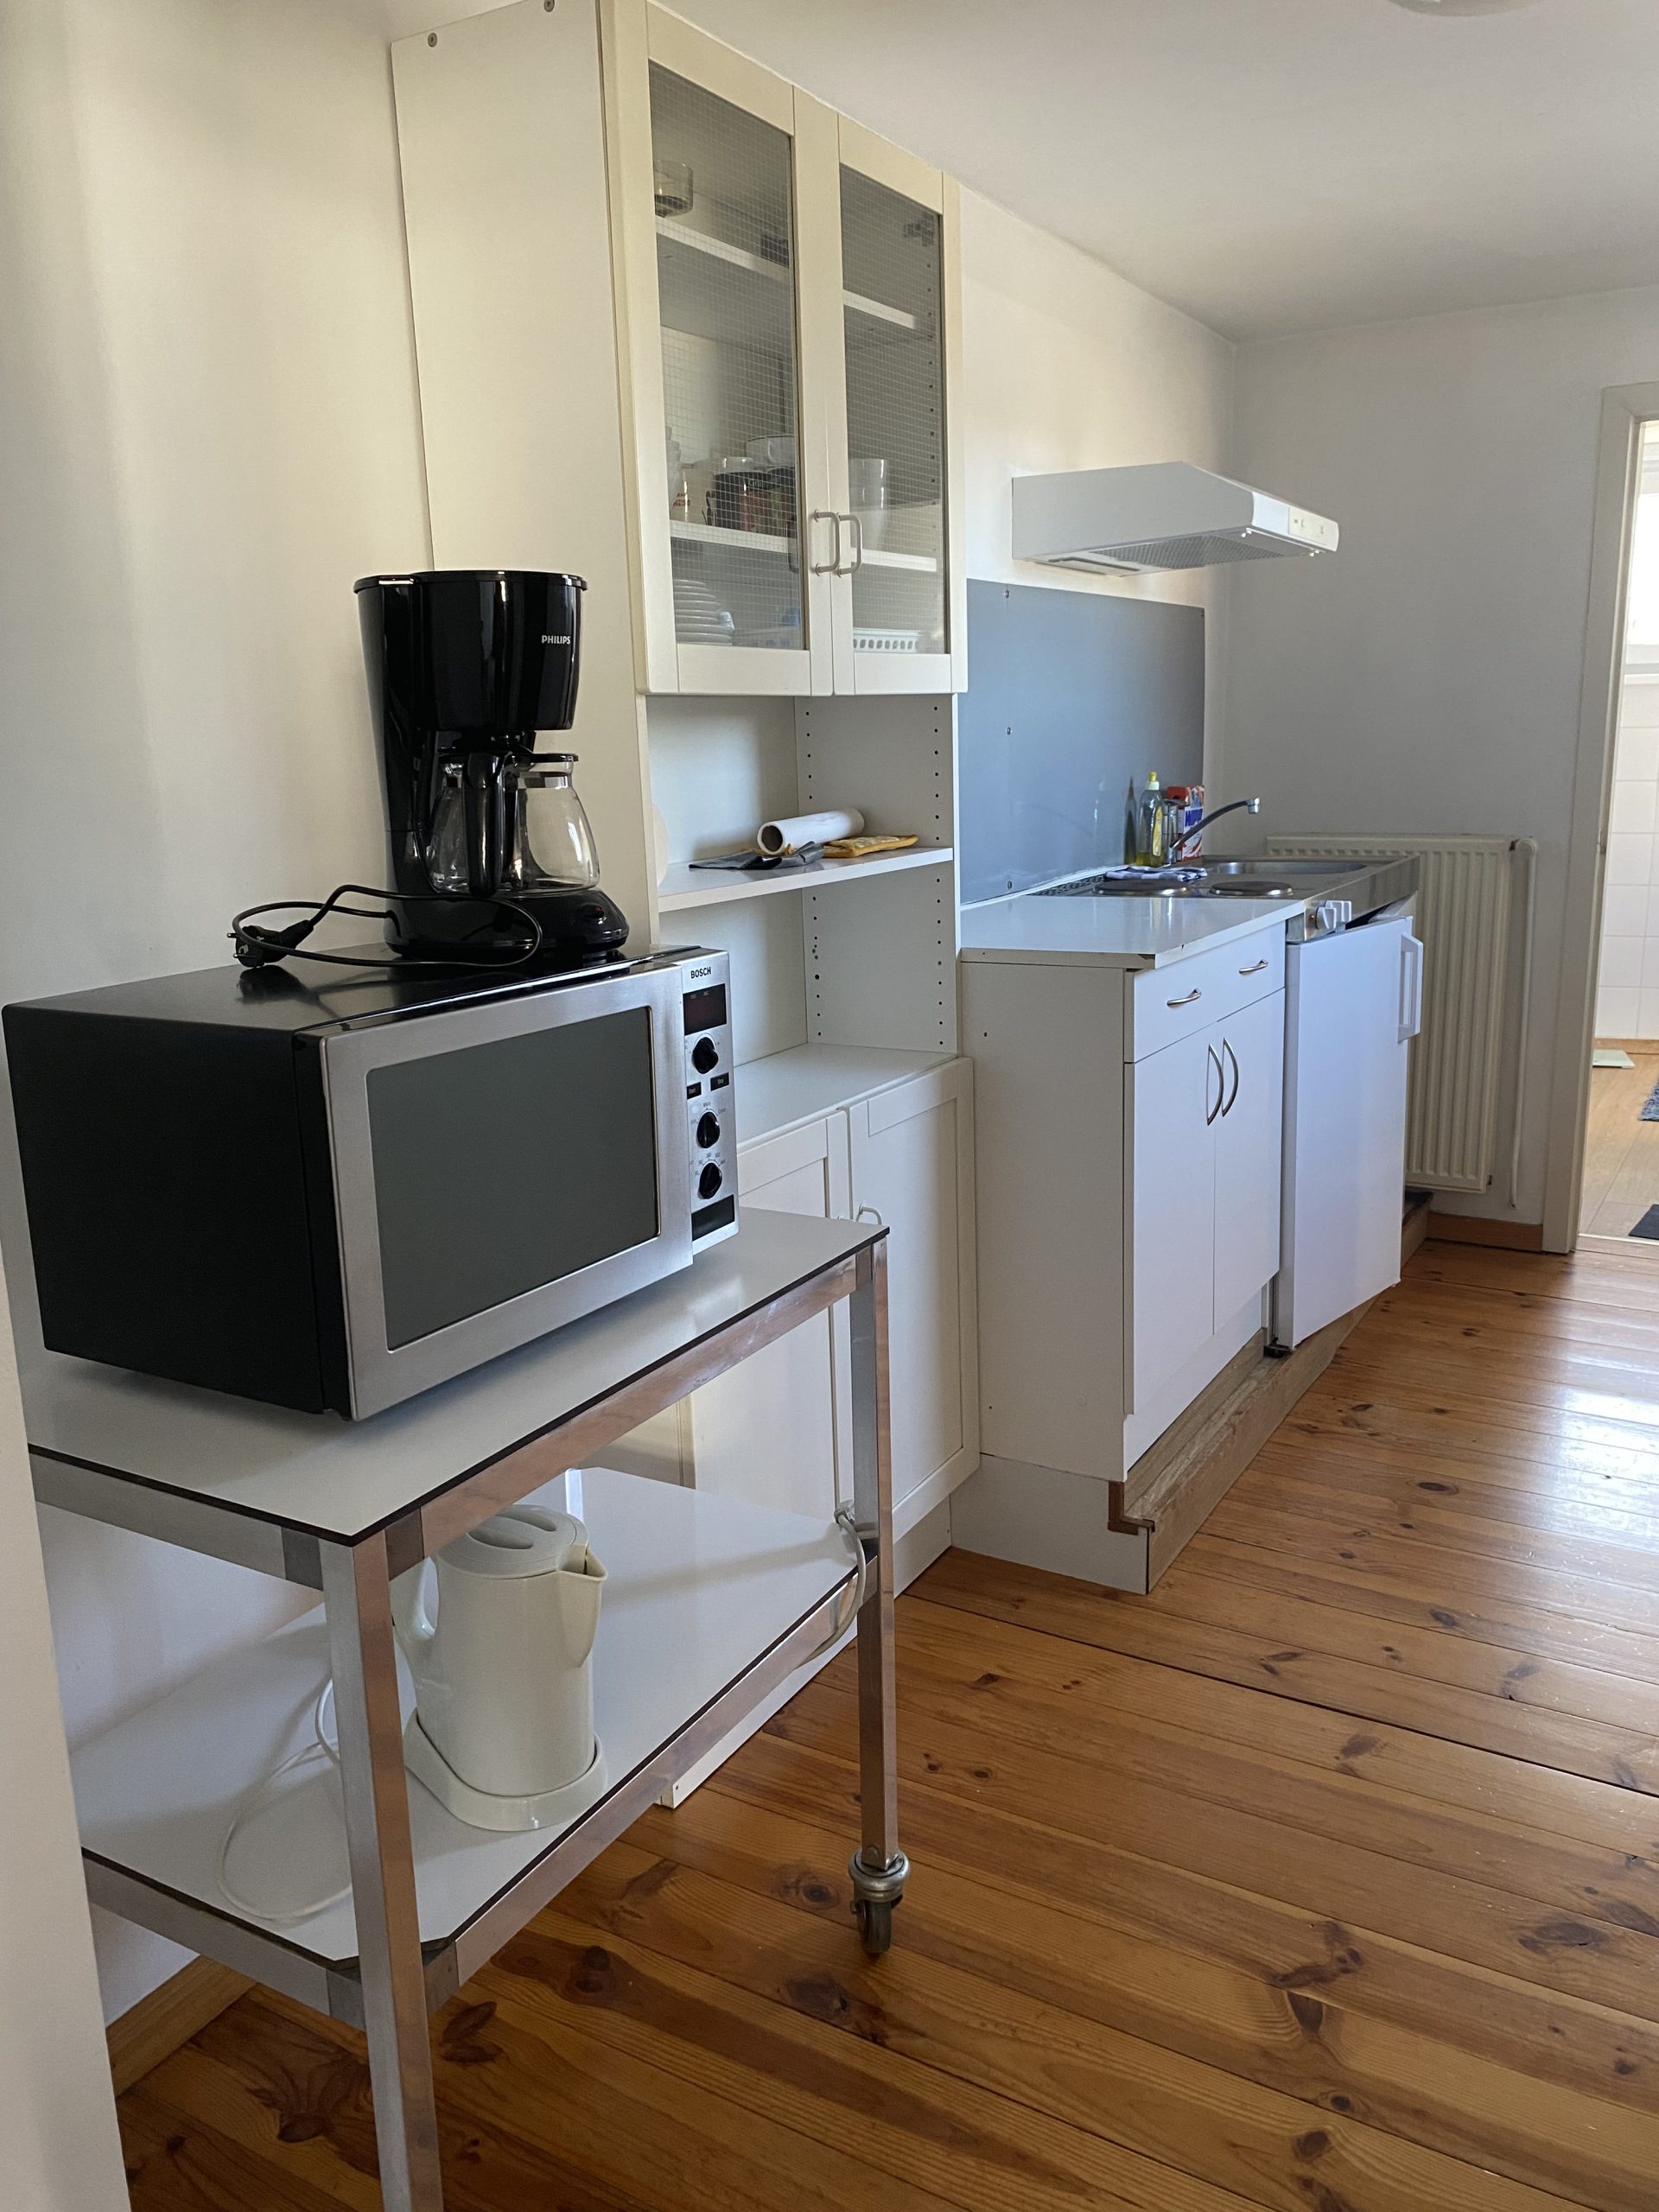 one-bedroom for rent in Ghent -Kitchen